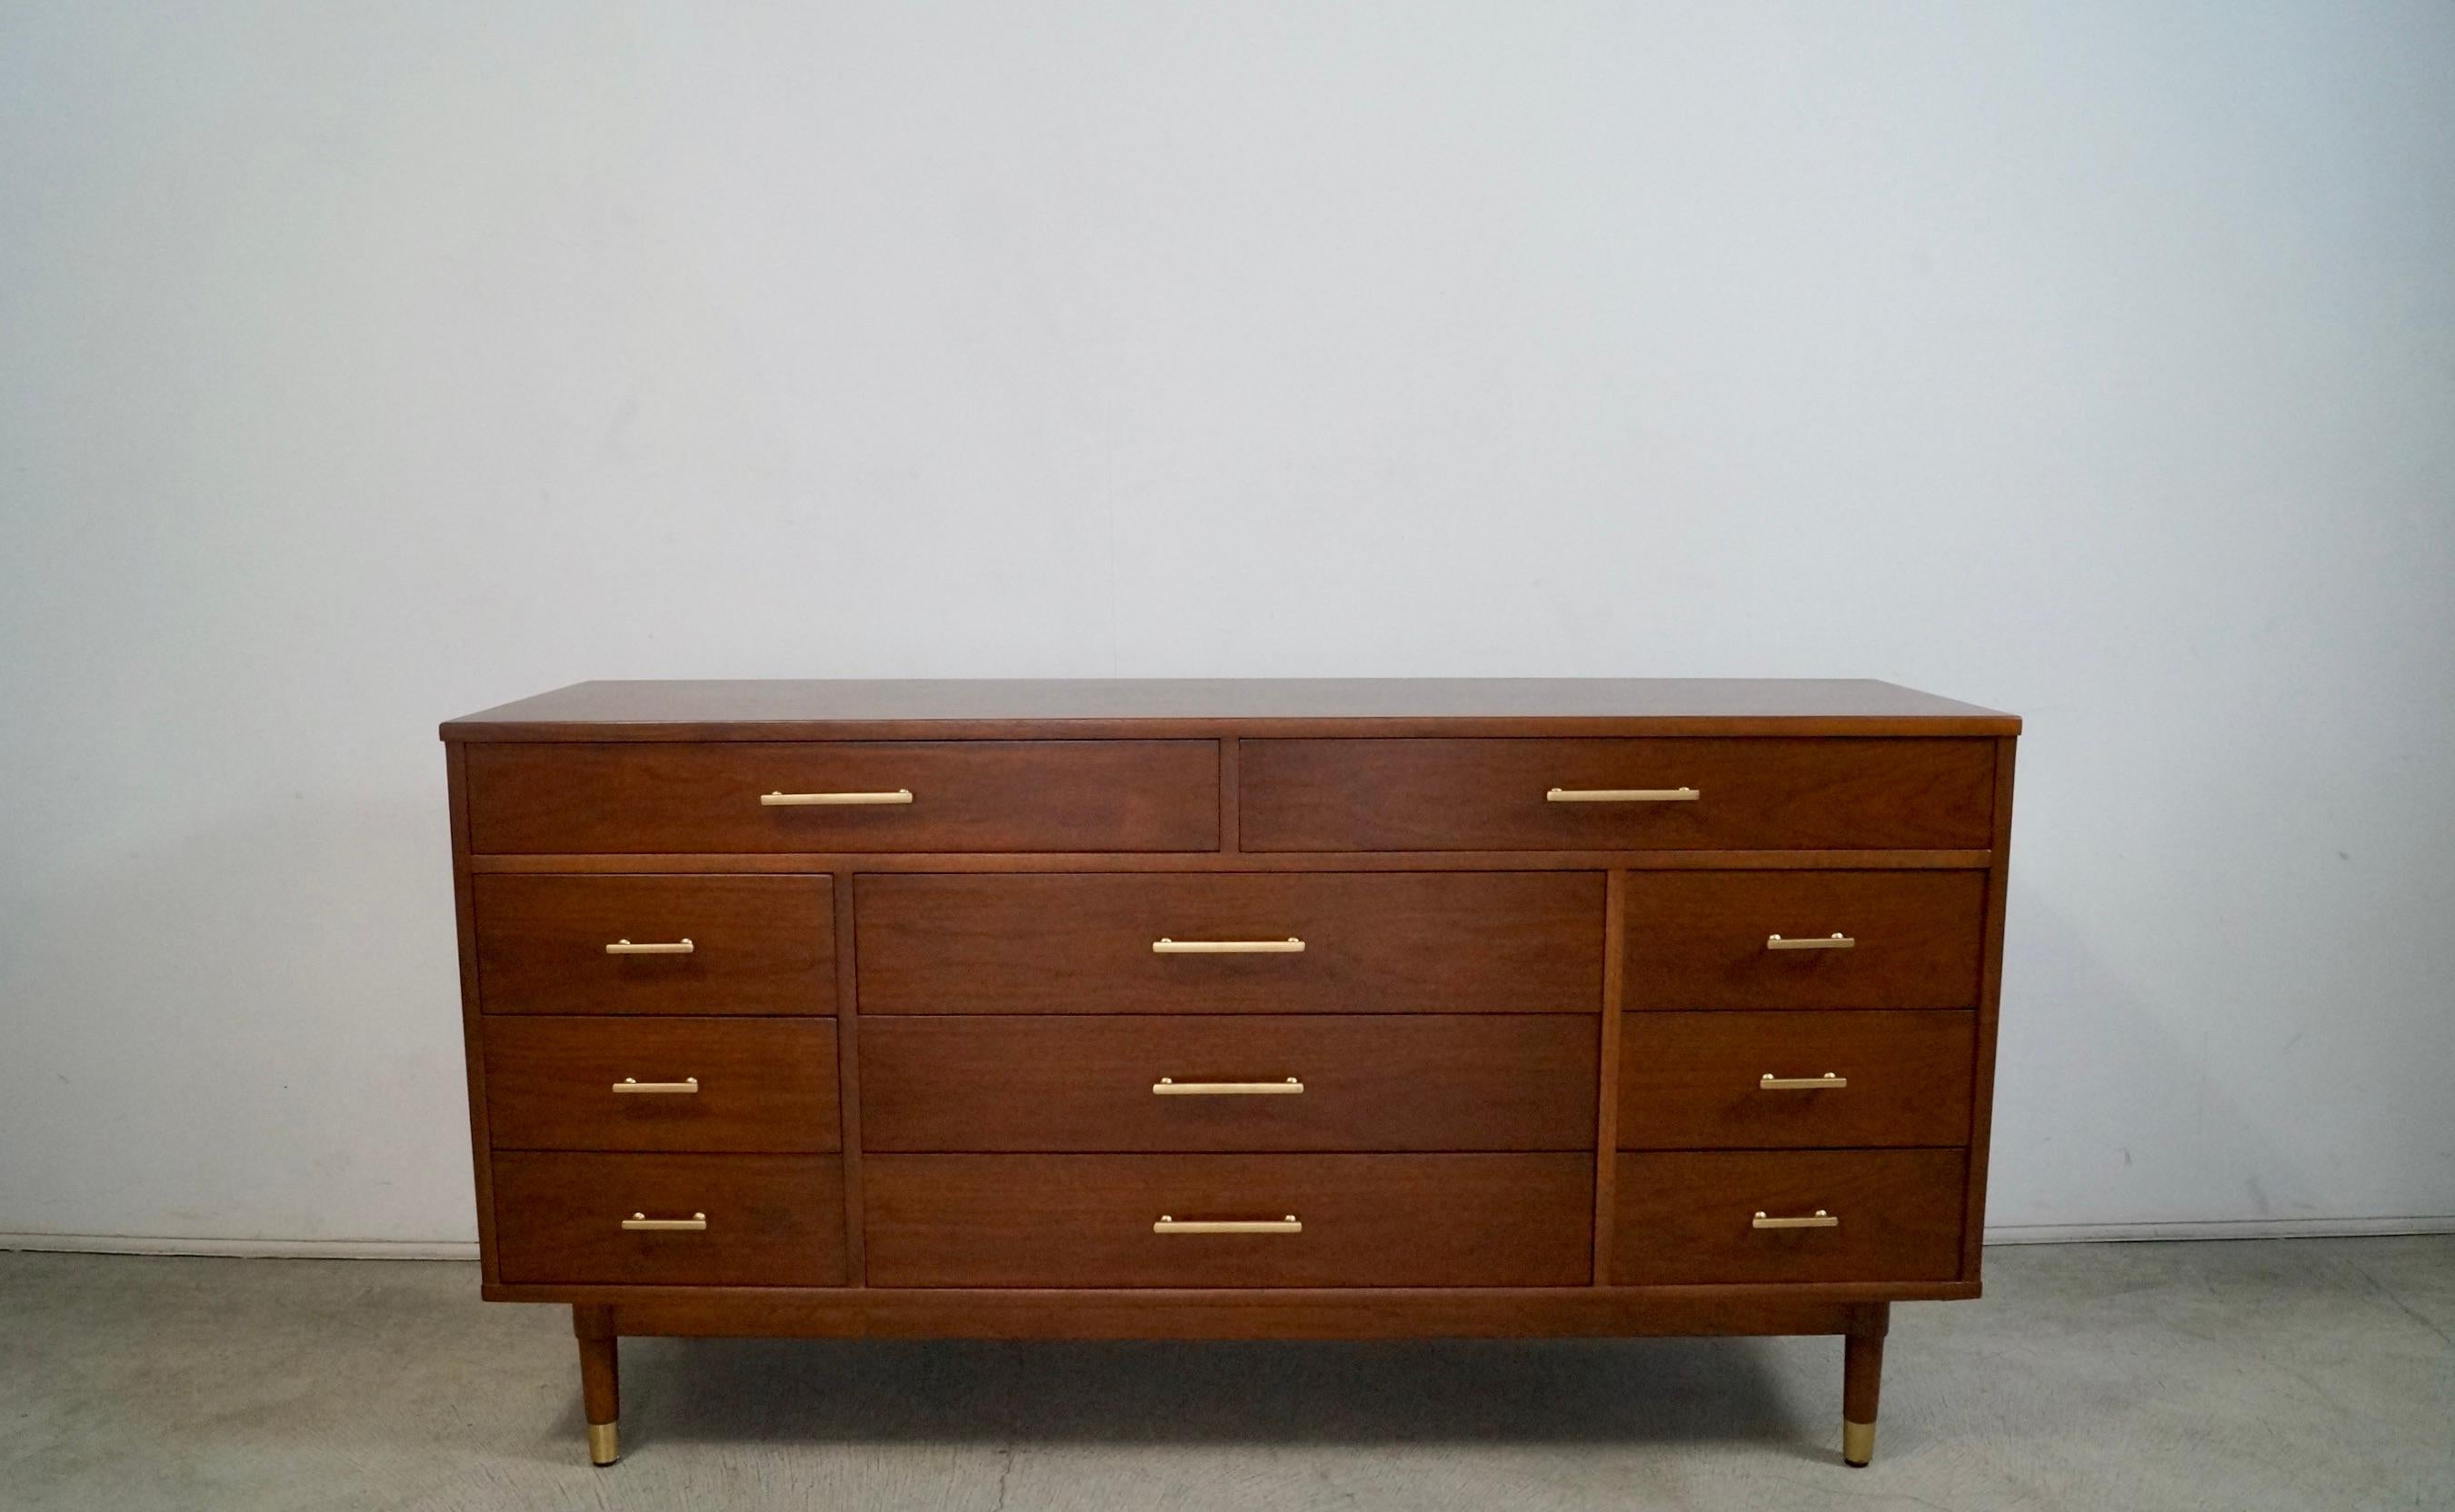 Vintage Midcentury Modern dresser for sale. Manufactured by Drexel in the 1956, and is part of the Biscayne series. It has been professionally restored, and is immaculate. It has 11 total drawers and offers lots of storage. It's a high-quality piece